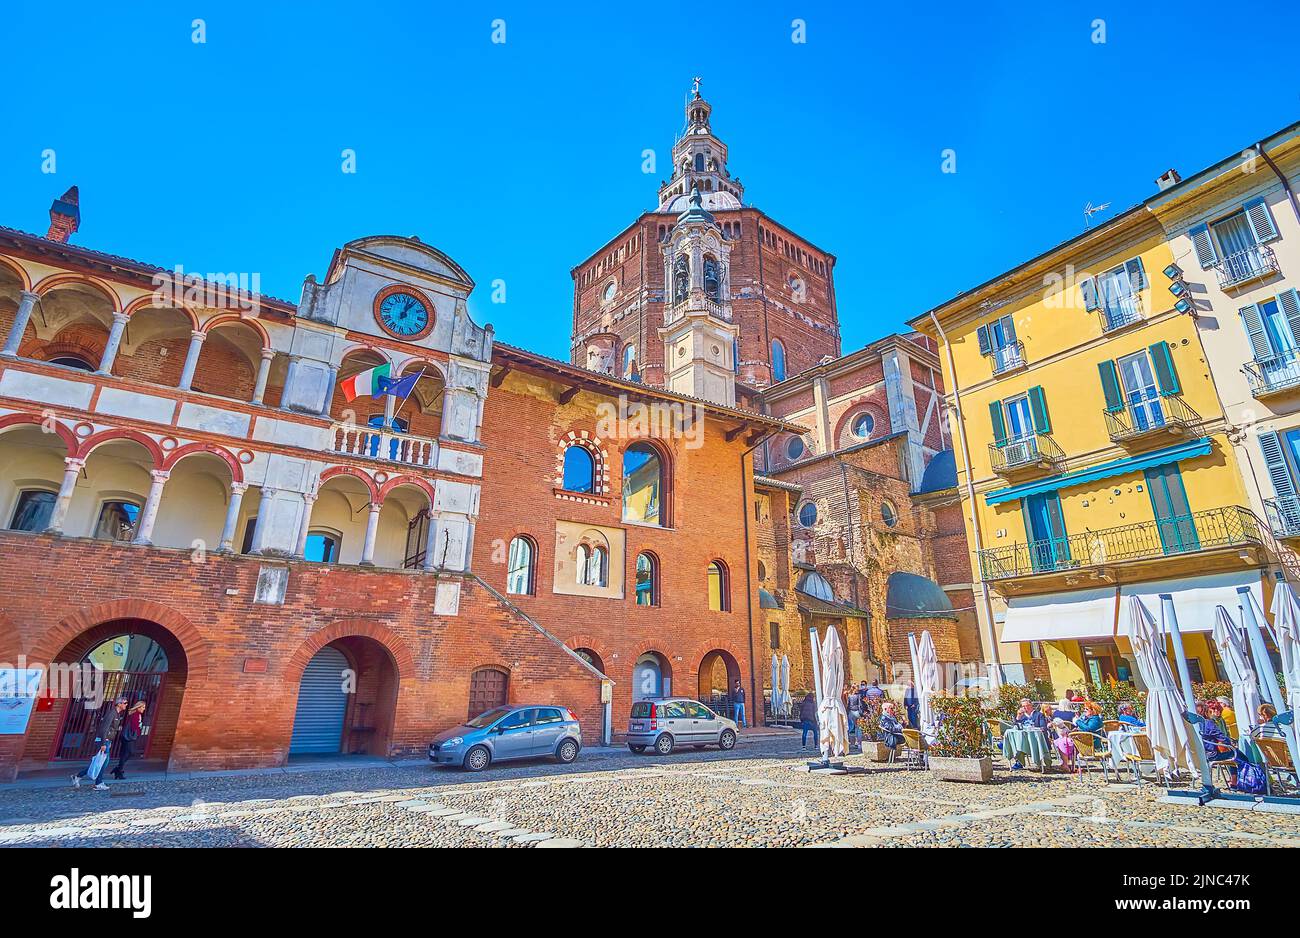 PAVIA, ITALY - APRIL 9, 2022: Beautiful medieval Palazzo Broletto and the dome of Cathedral, on April 9 in Pavia, Italy Stock Photo